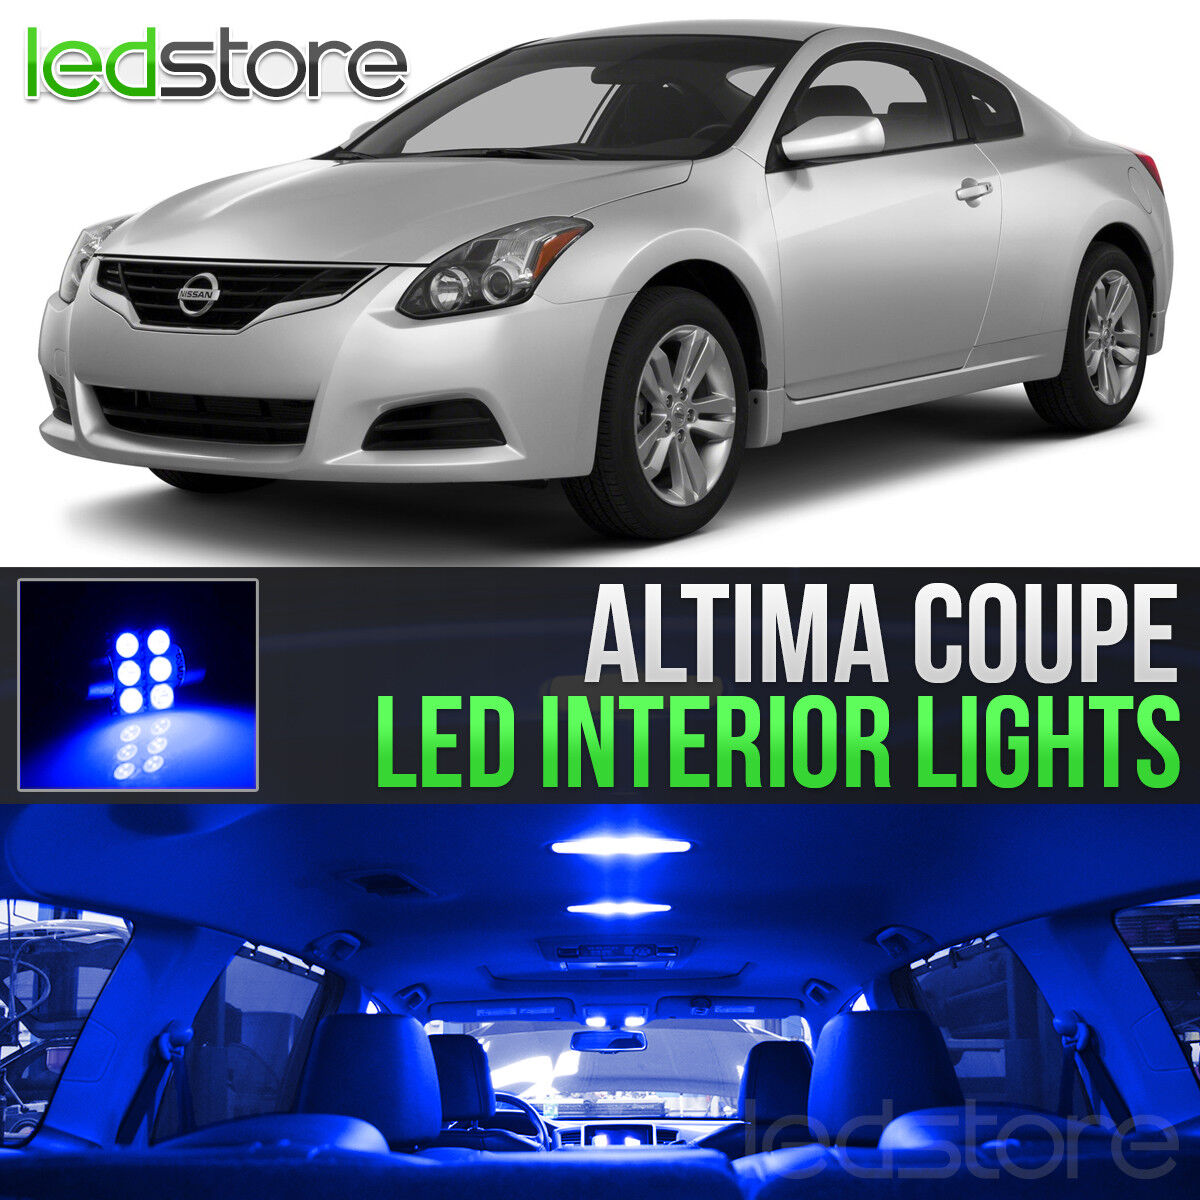 Blue LED Lights Interior Kit Package Bulbs For 2008-2013 Nissan Altima Coupe